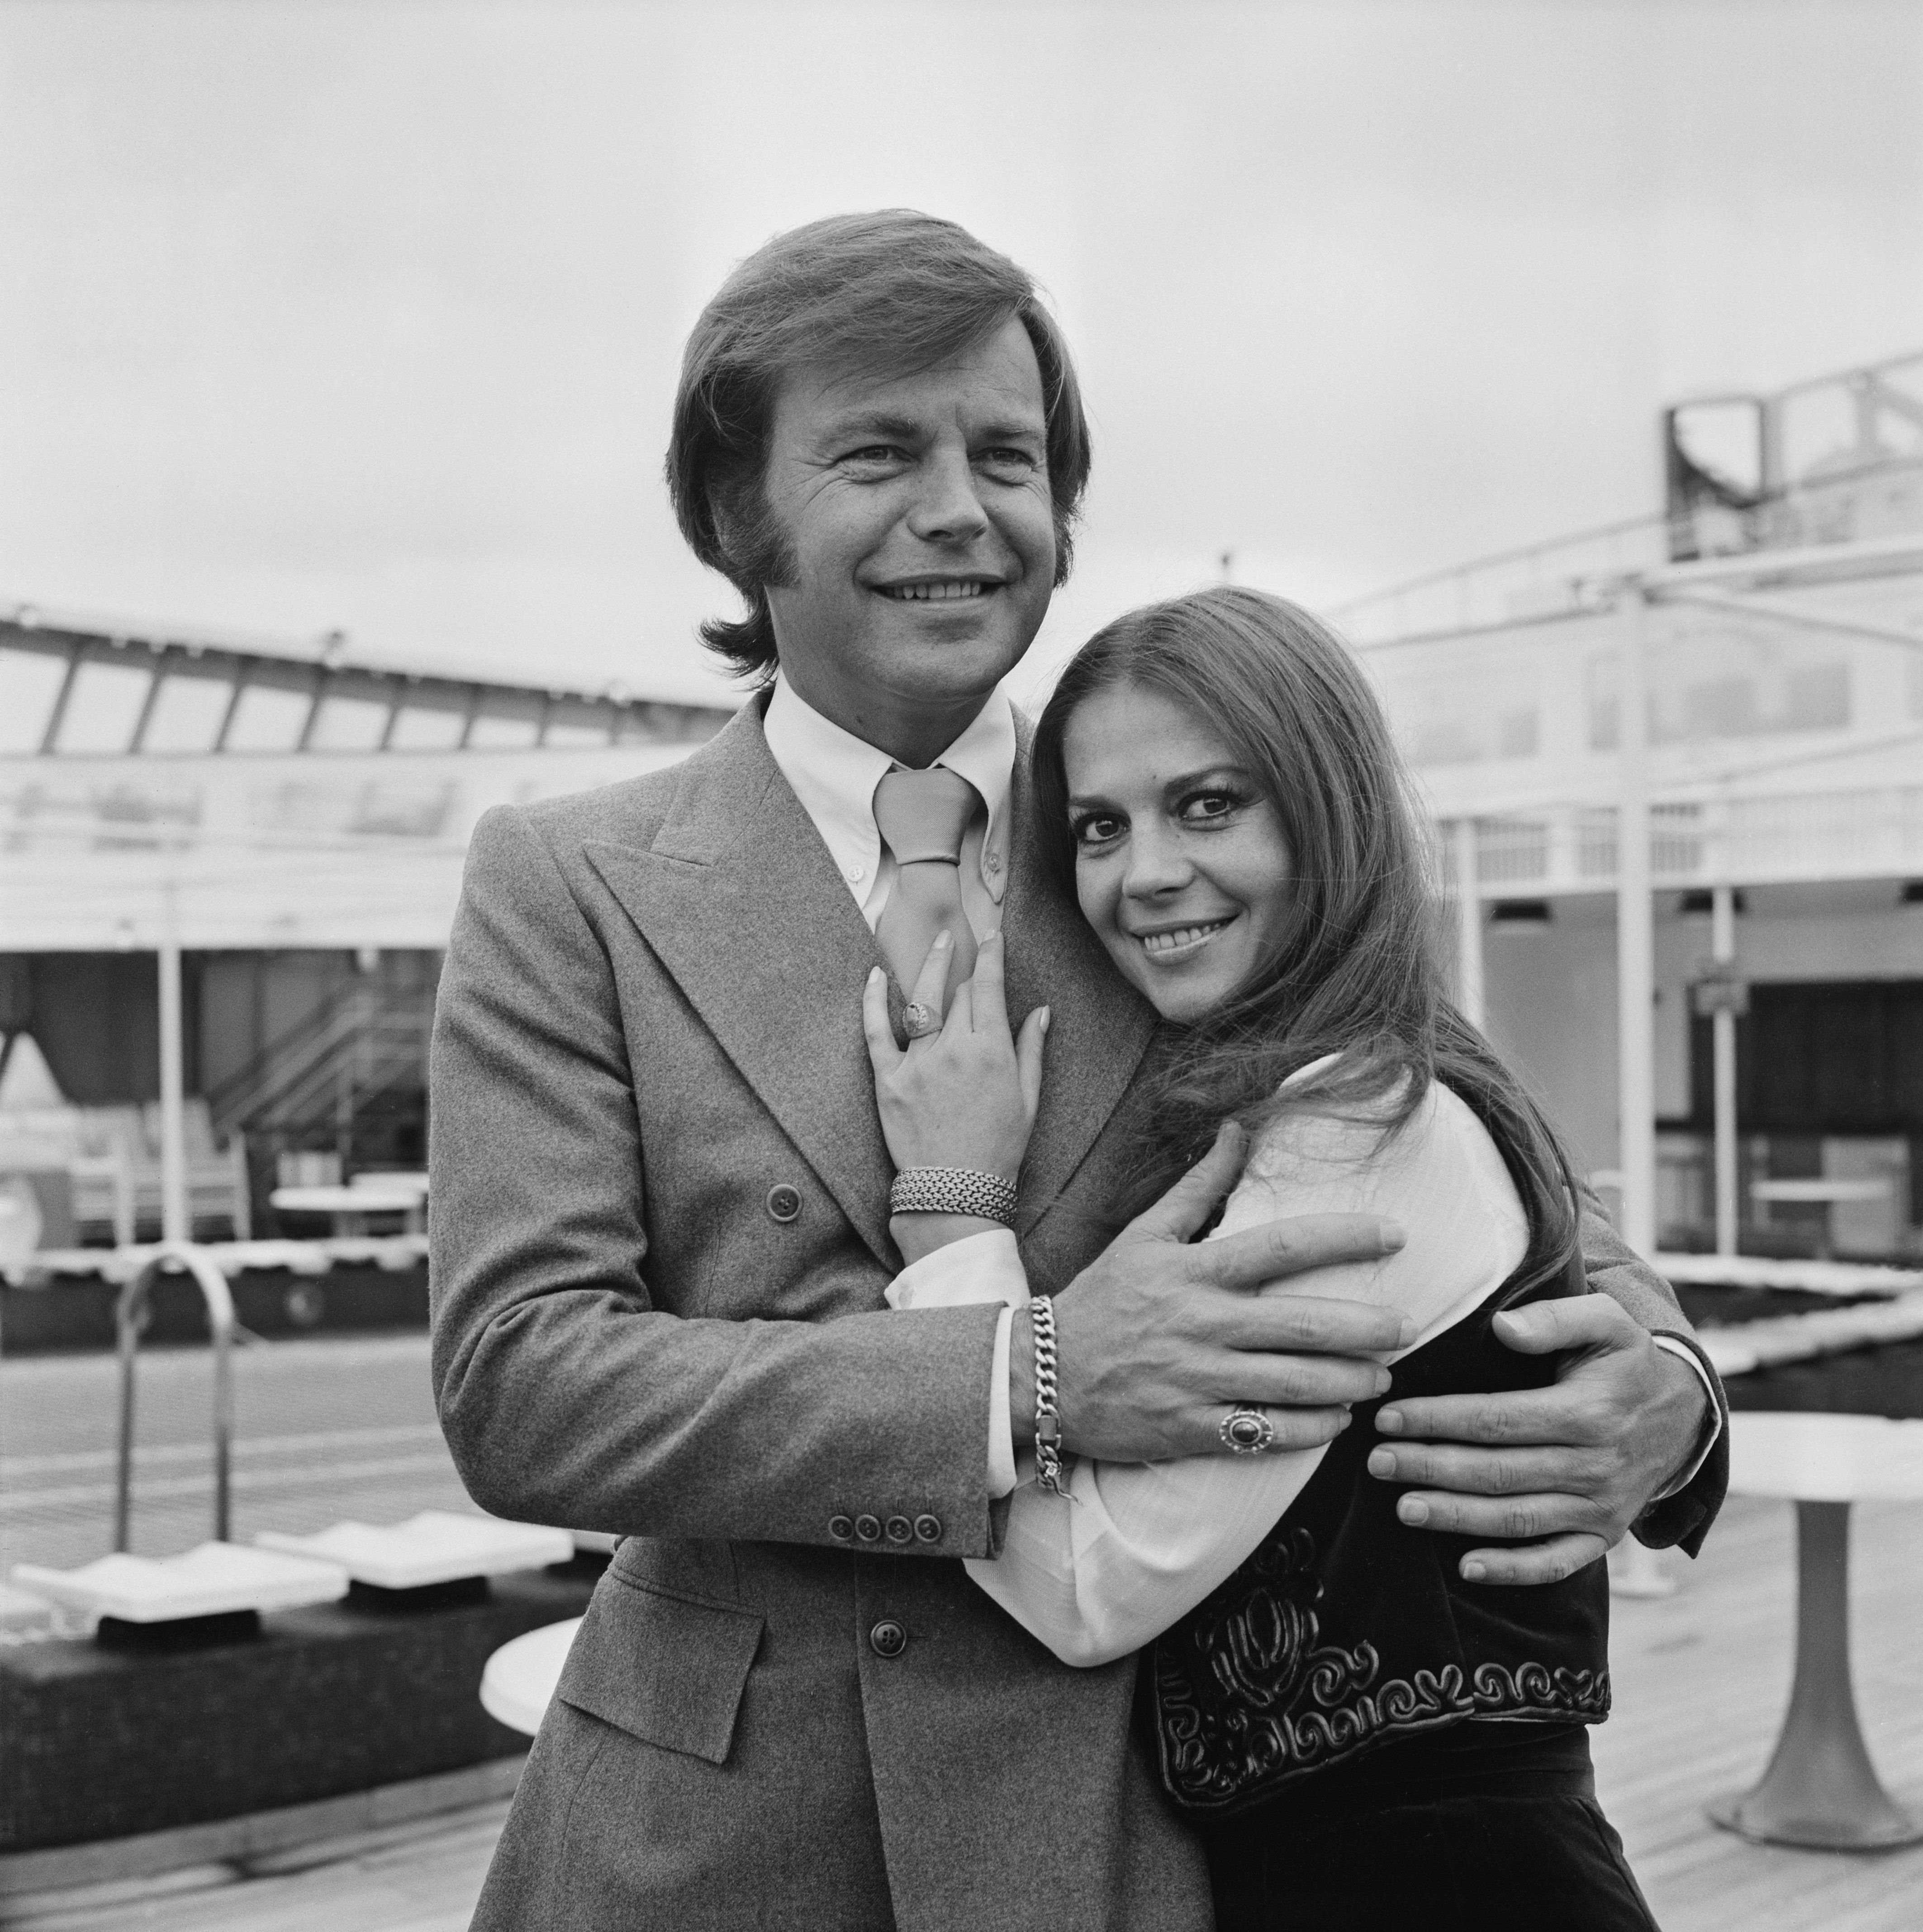 Robert Wagner and Natalie Wood posing together on April 23, 1972. | Source: Chris Wood/Daily Express/Hulton Archive/Getty Images